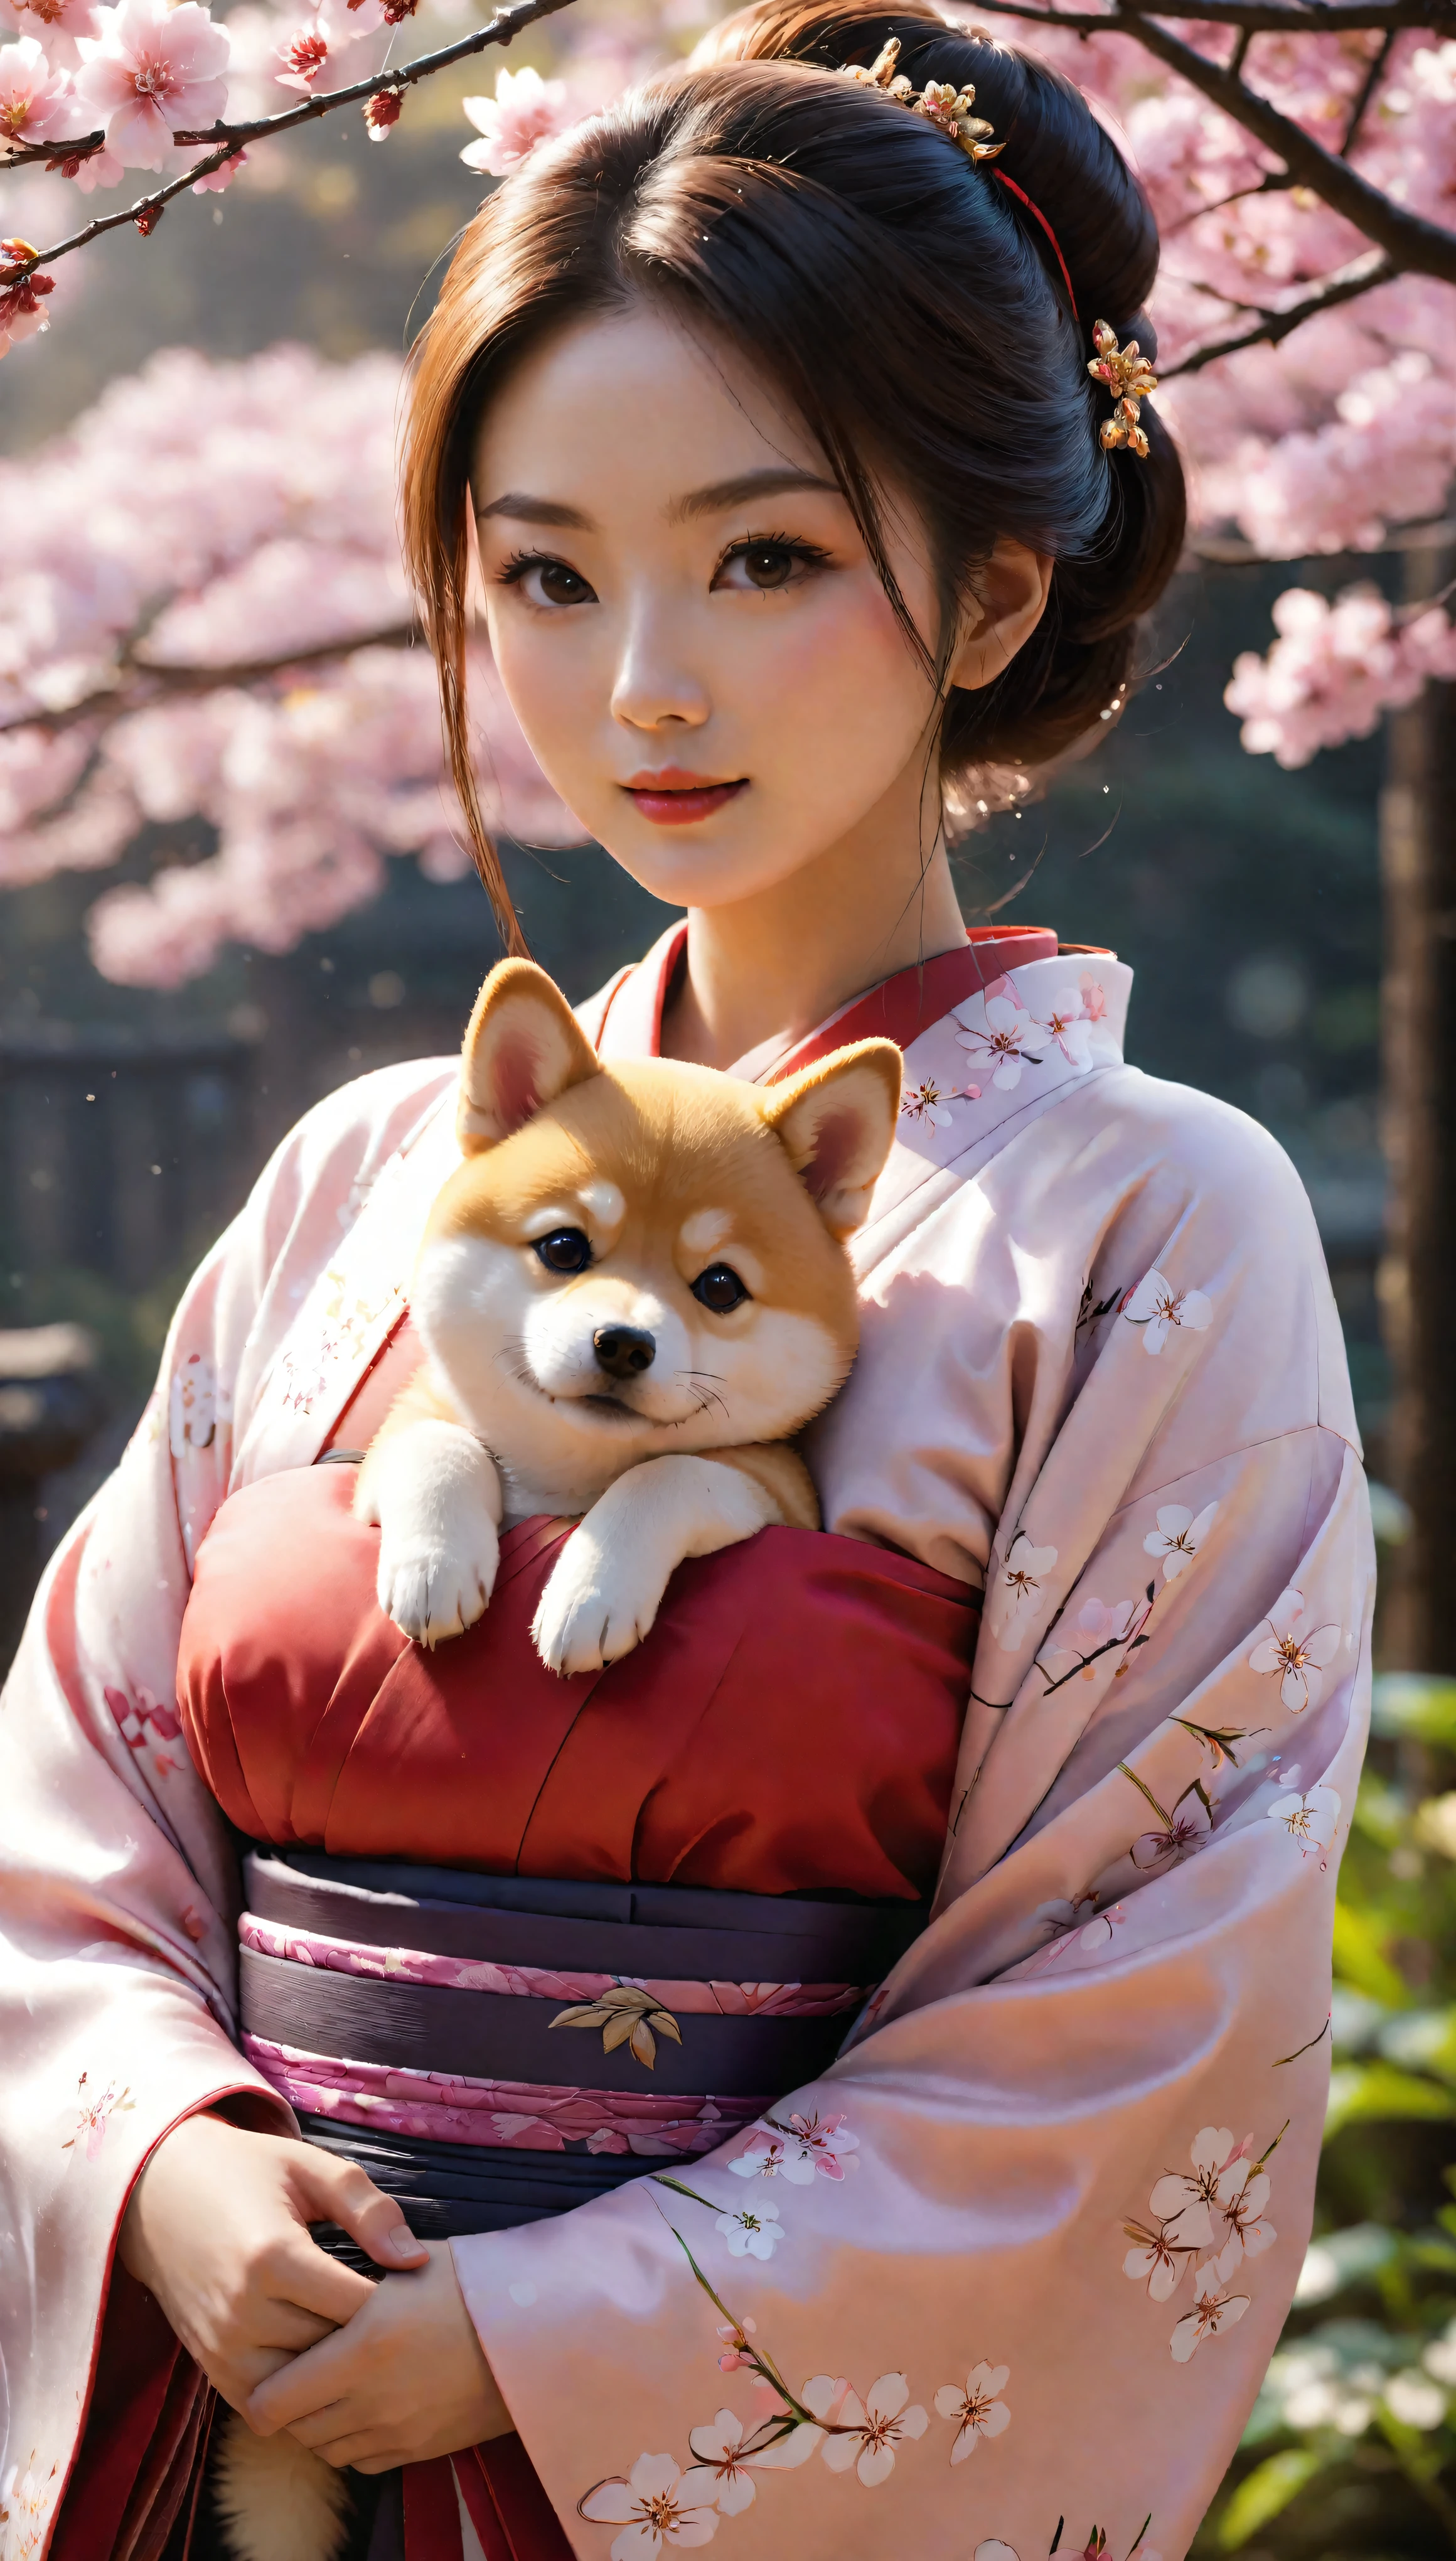 ((Masterpiece in maximum 16K resolution):1.6),((soft_color_photograpy:)1.5), ((Ultra-Detailed):1.4),((Movie-like still images and dynamic angles):1.3). | ((cinematic photo of beautiful Japanese lady in a kimono holding her cute Shiba Inu):1.3), (Beautiful Japanese lady in Kimono), (focus on the Shiba Inu), (macro lens), (Sakura Flowers), (Beautiful Japanese Park), (luminous object), (Happy atmosphere), (shimmer), (visual experience),(Realism), (Realistic),award-winning graphics, dark shot, film grain, extremely detailed, Digital Art, rtx, Unreal Engine, scene concept anti glare effect, All captured with sharp focus. | Rendered in ultra-high definition with UHD and retina quality, this masterpiece ensures anatomical correctness and textured skin with super detail. With a focus on high quality and accuracy, this award-winning portrayal captures every nuance in stunning 16k resolution, immersing viewers in its lifelike depiction. | ((perfect_composition, perfect_design, perfect_layout, perfect_detail, ultra_detailed)), ((enhance_all, fix_everything)), More Detail, Enhance.